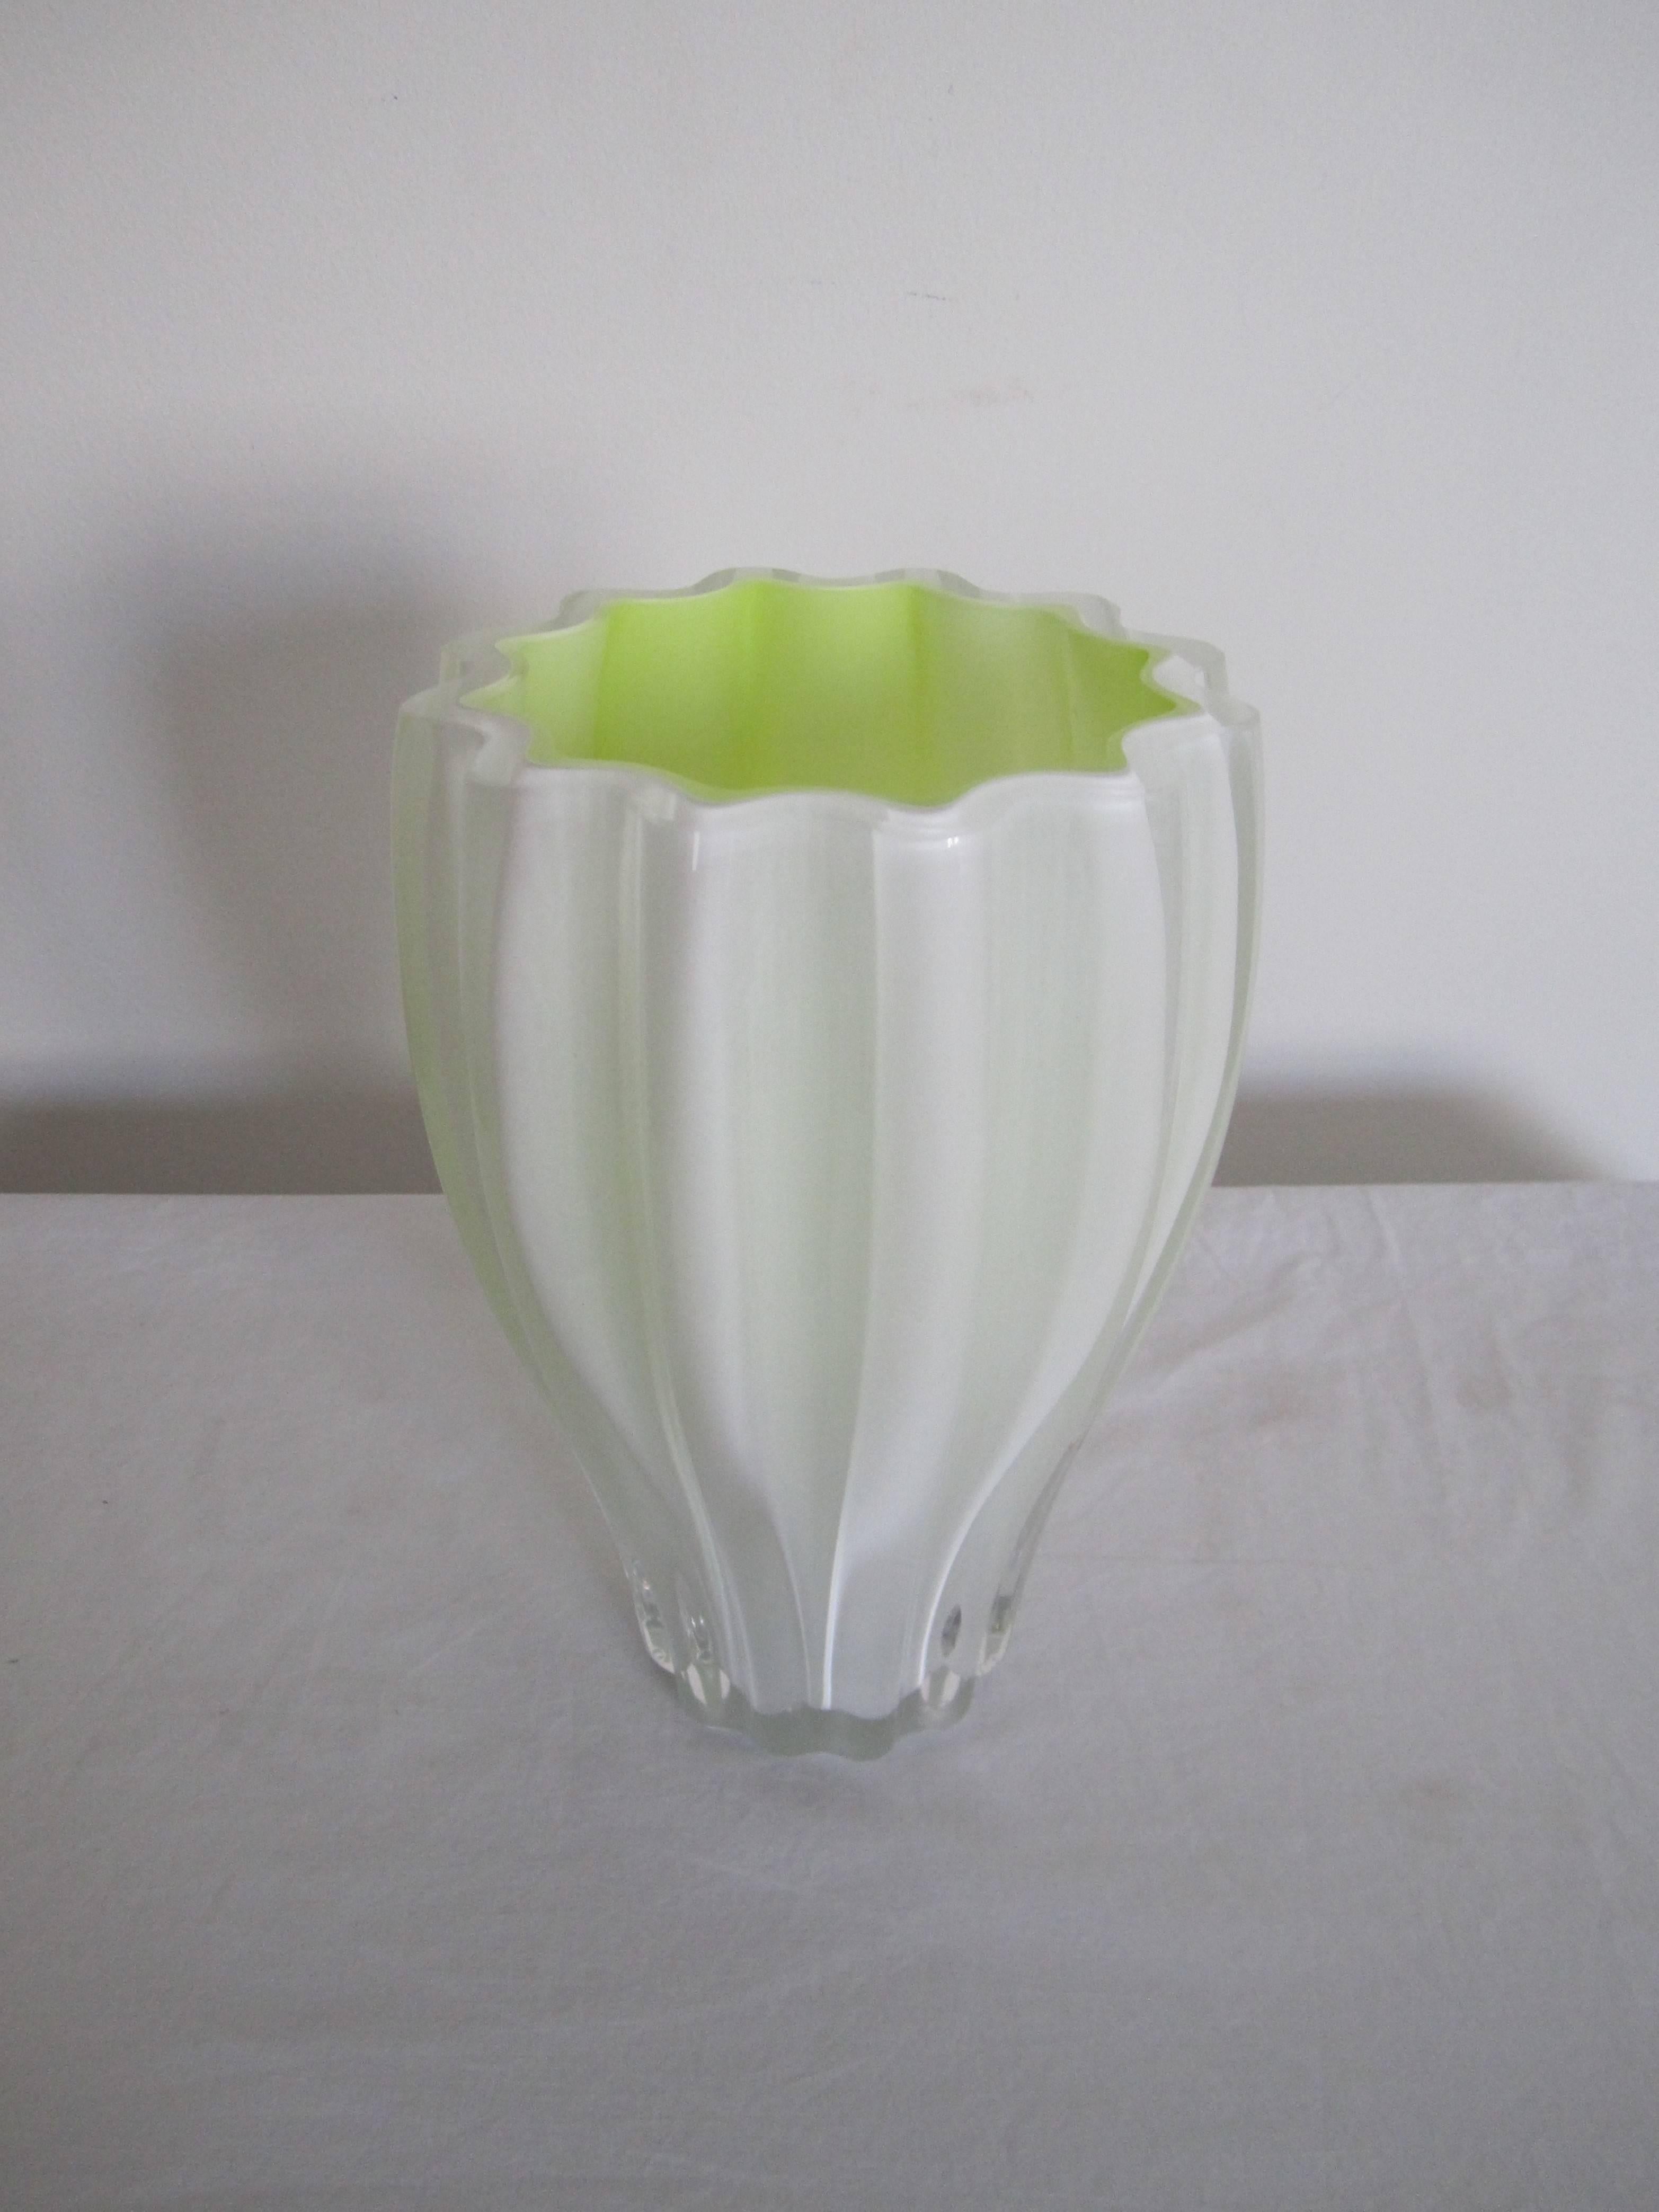 20th Century Postmodern White and Neon Yellow Art Glass Vase from Sweden For Sale